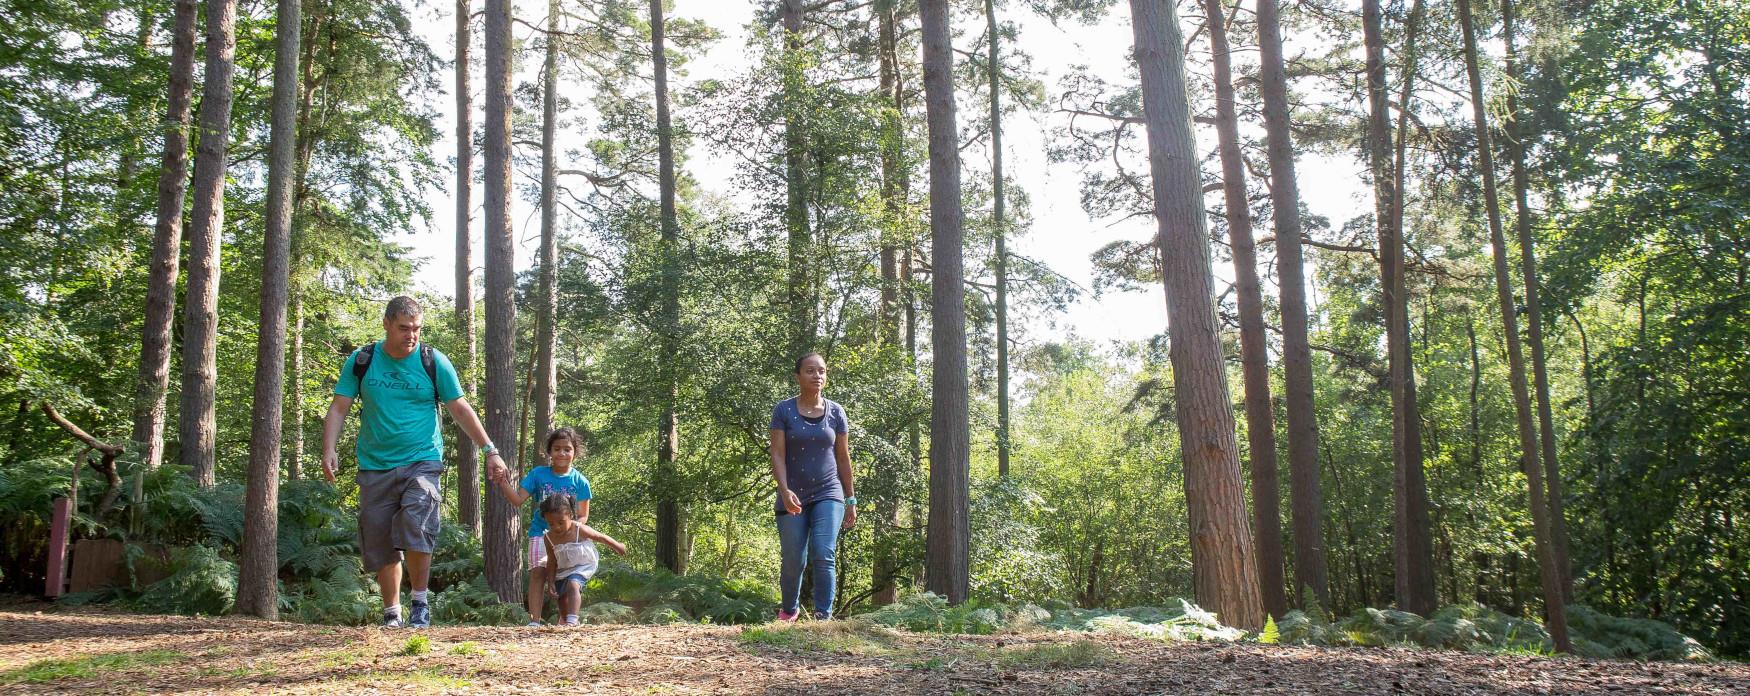 Family Walking in the Forest